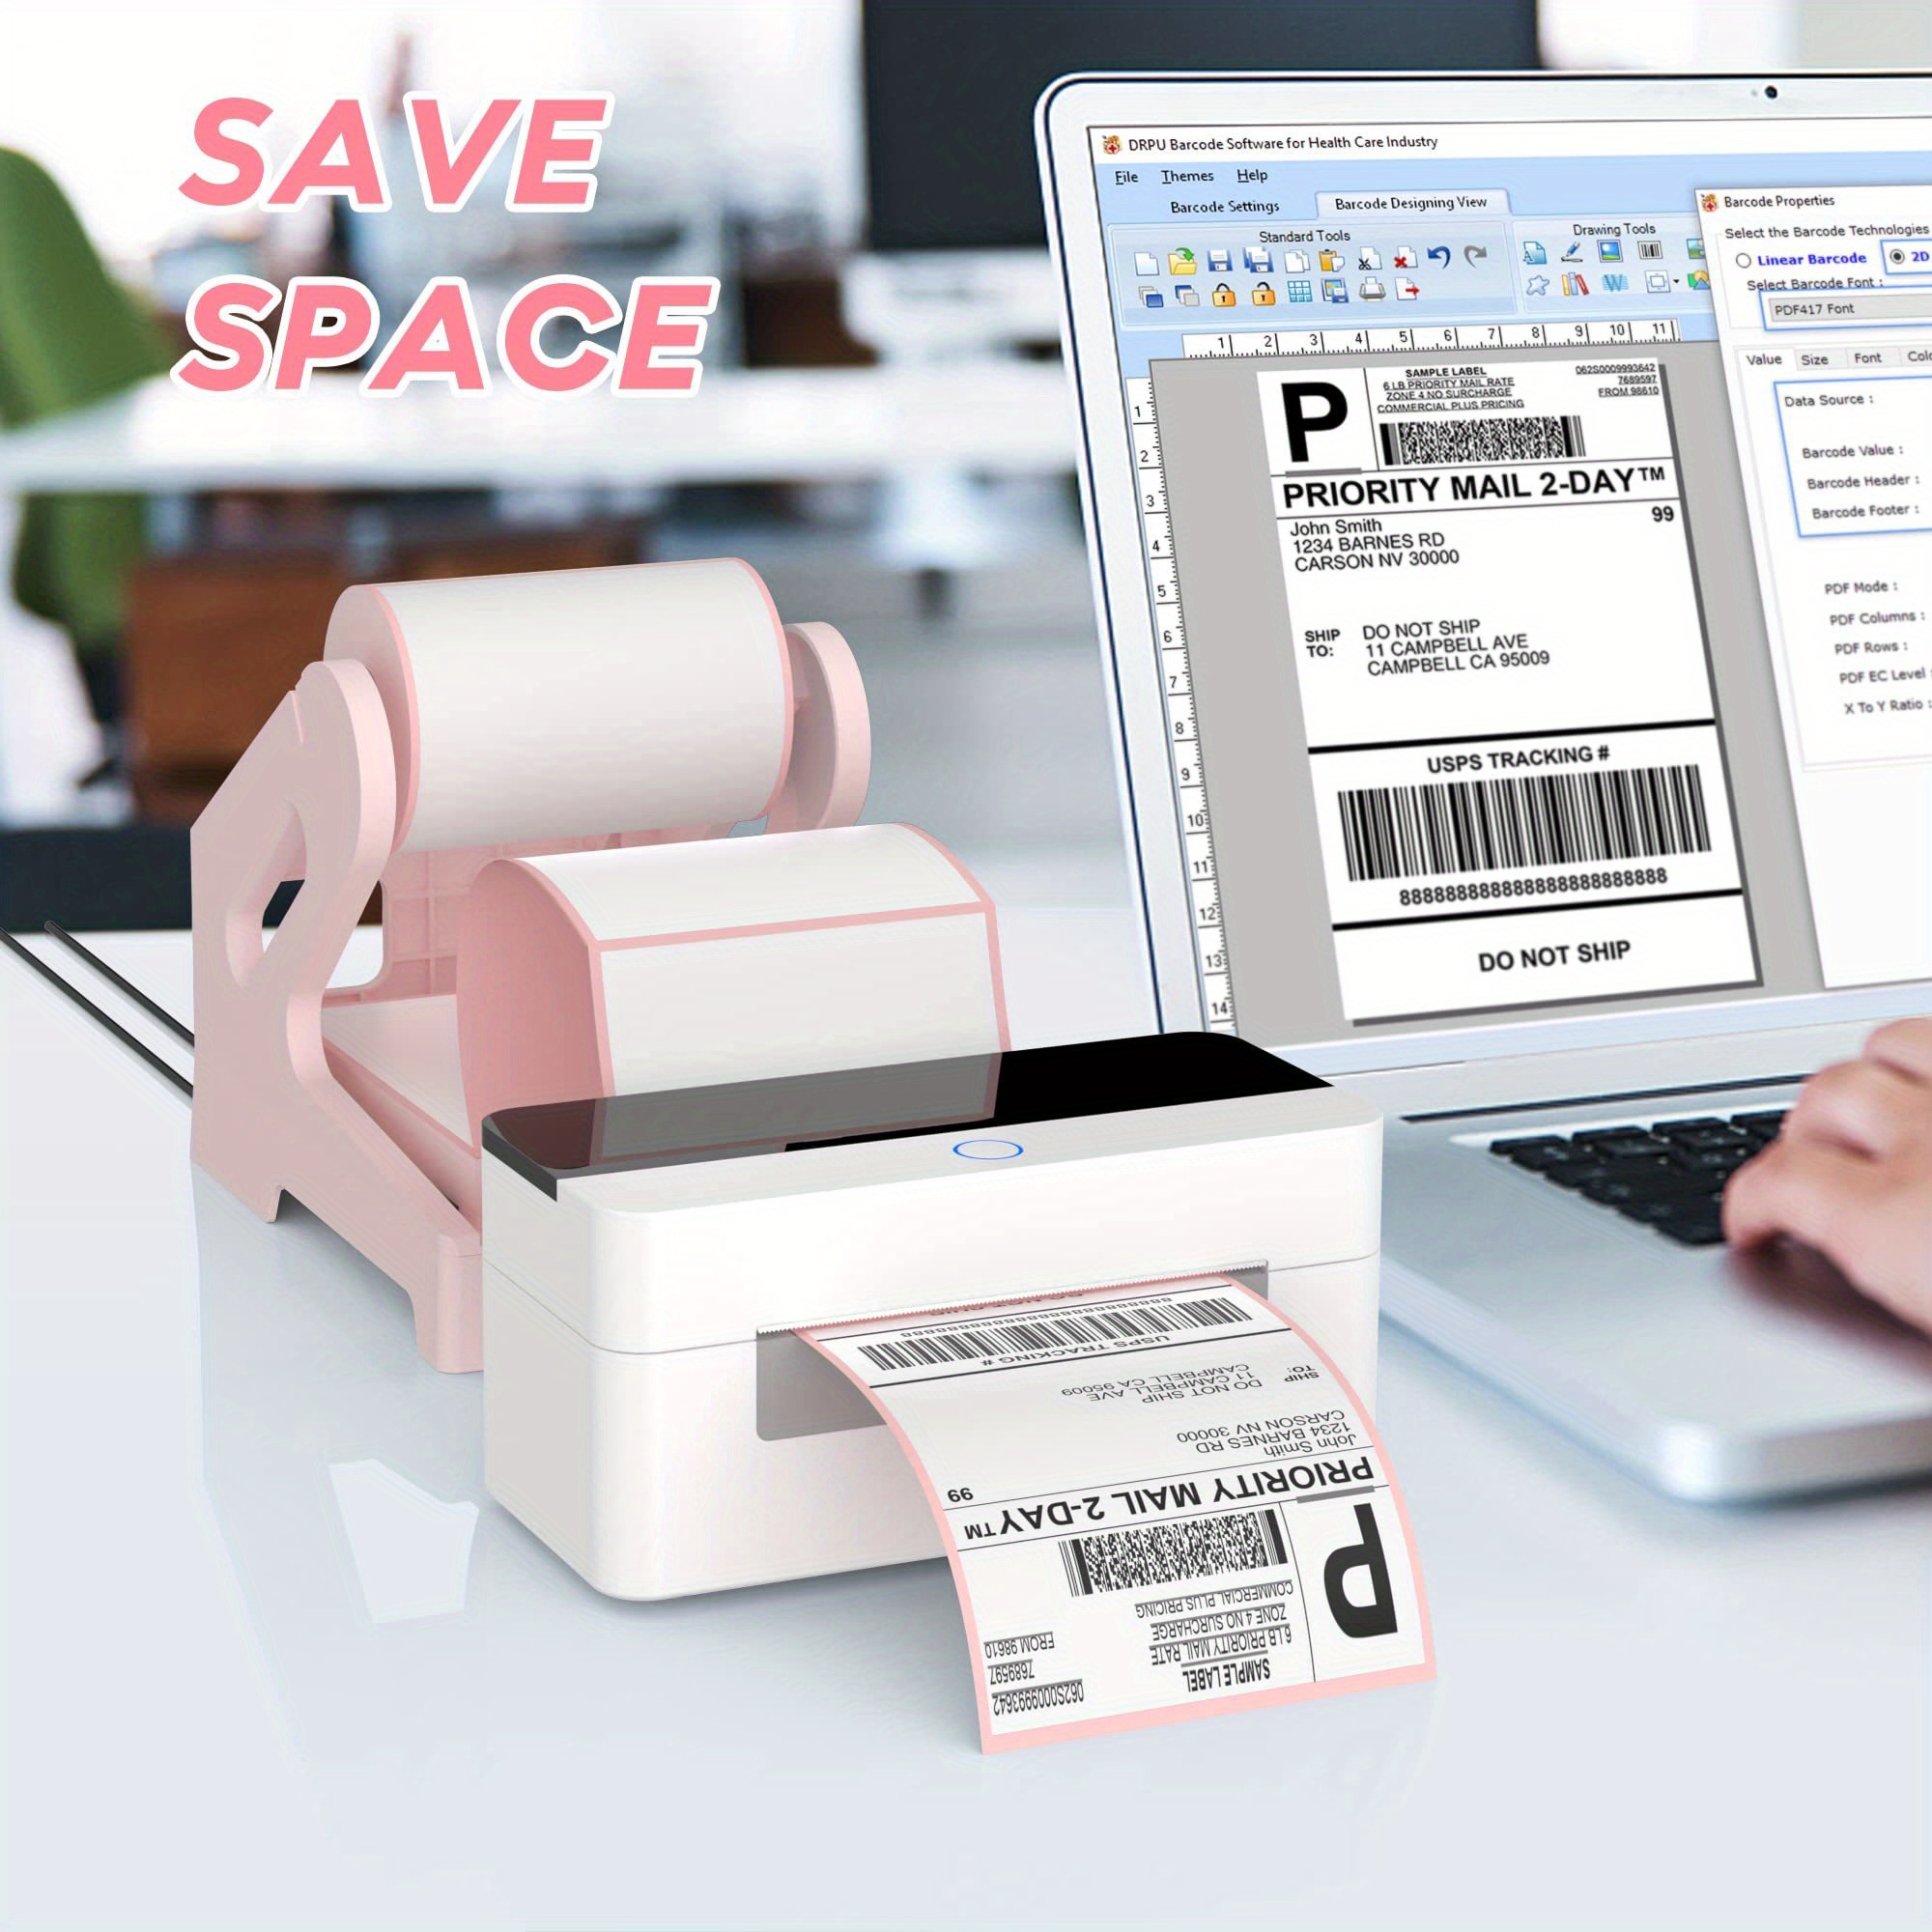 Millaass Thermal Label Holder, for Rolls and Fan-Fold Labels, Plastic, Work  with Desktop Label Printer for Office and Home, Label Stand, Sticker roll